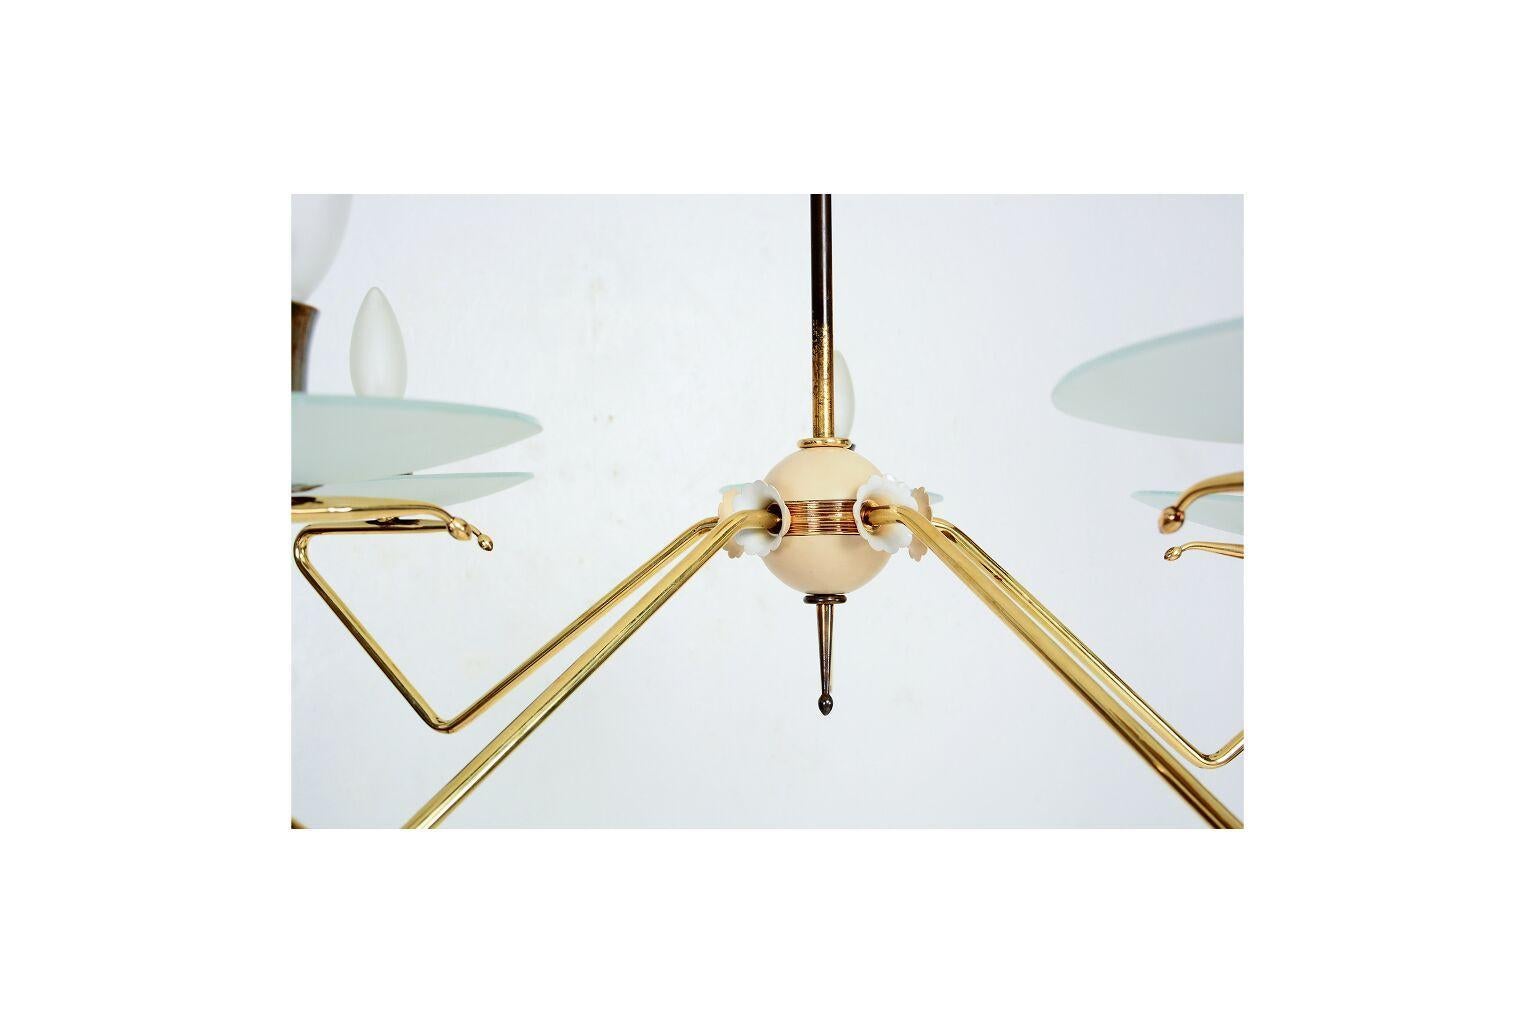 For your consideration a vintage Italian chandelier in excellent restored condition. Polished arms in solid brass with custom made glass diffusers in frost finish. Chandelier has been rewired and it is ready to go. Requires five (5) E-14 bulbs not